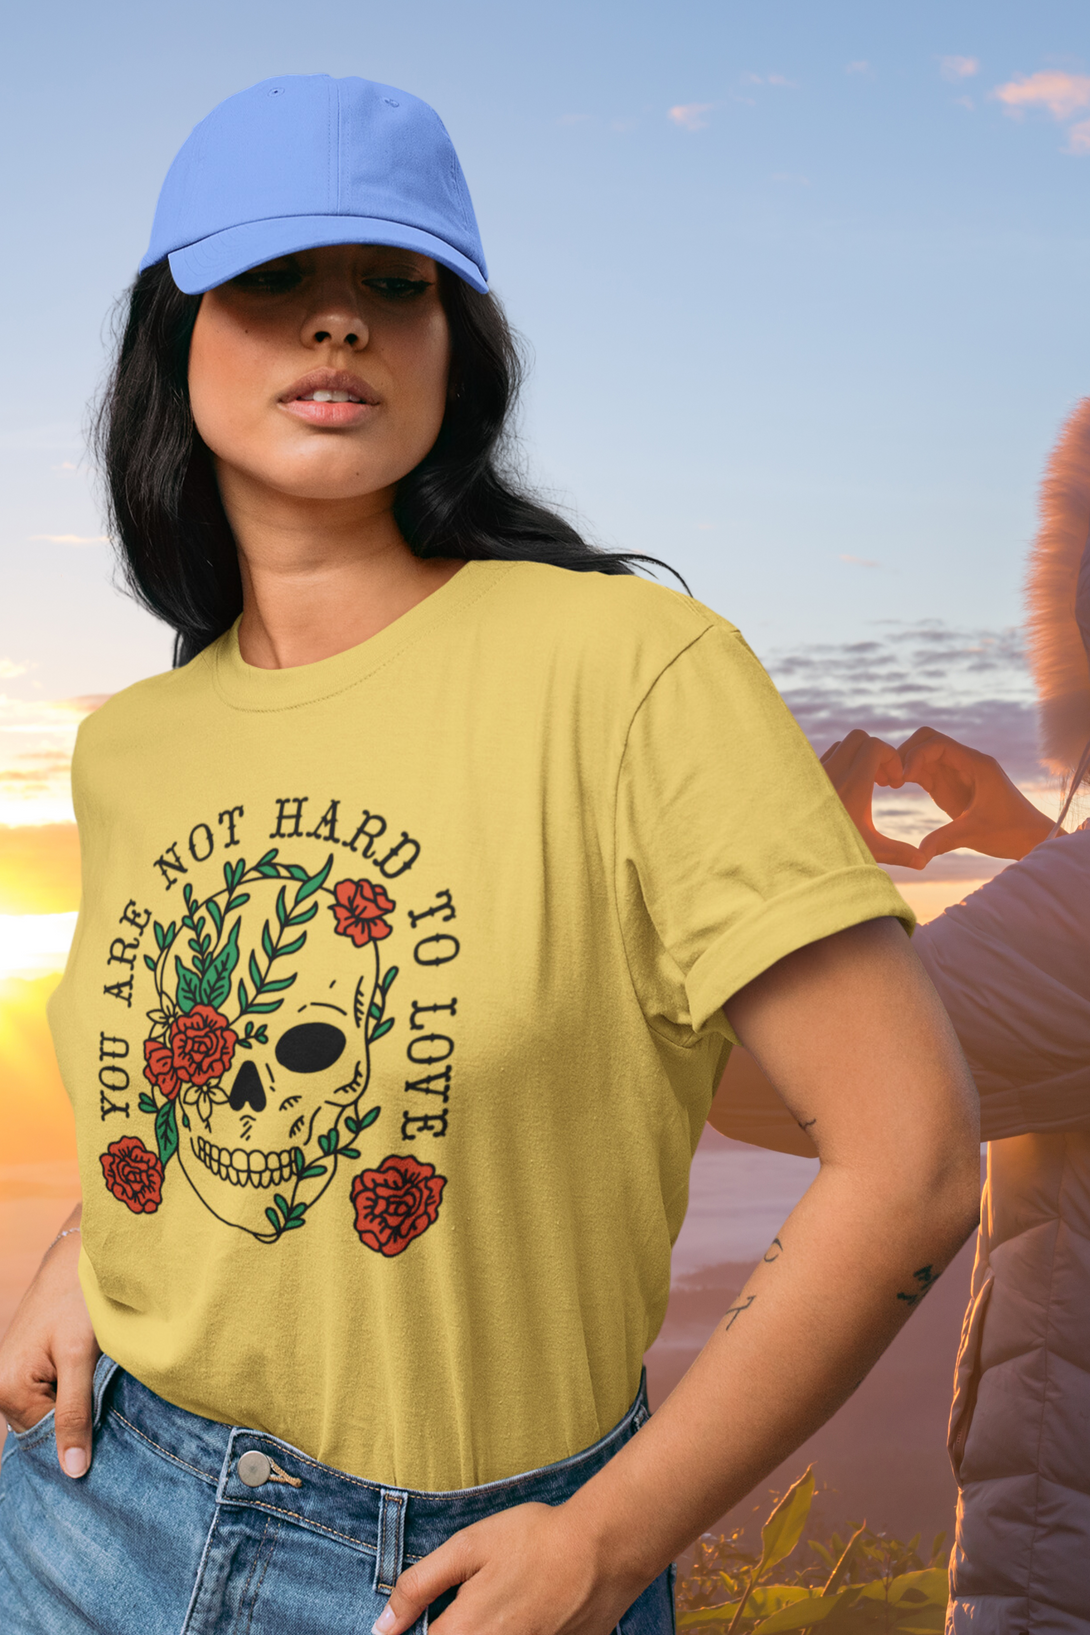 You Are Not Hard To Love Printed T-Shirt For Women - WowWaves - 5